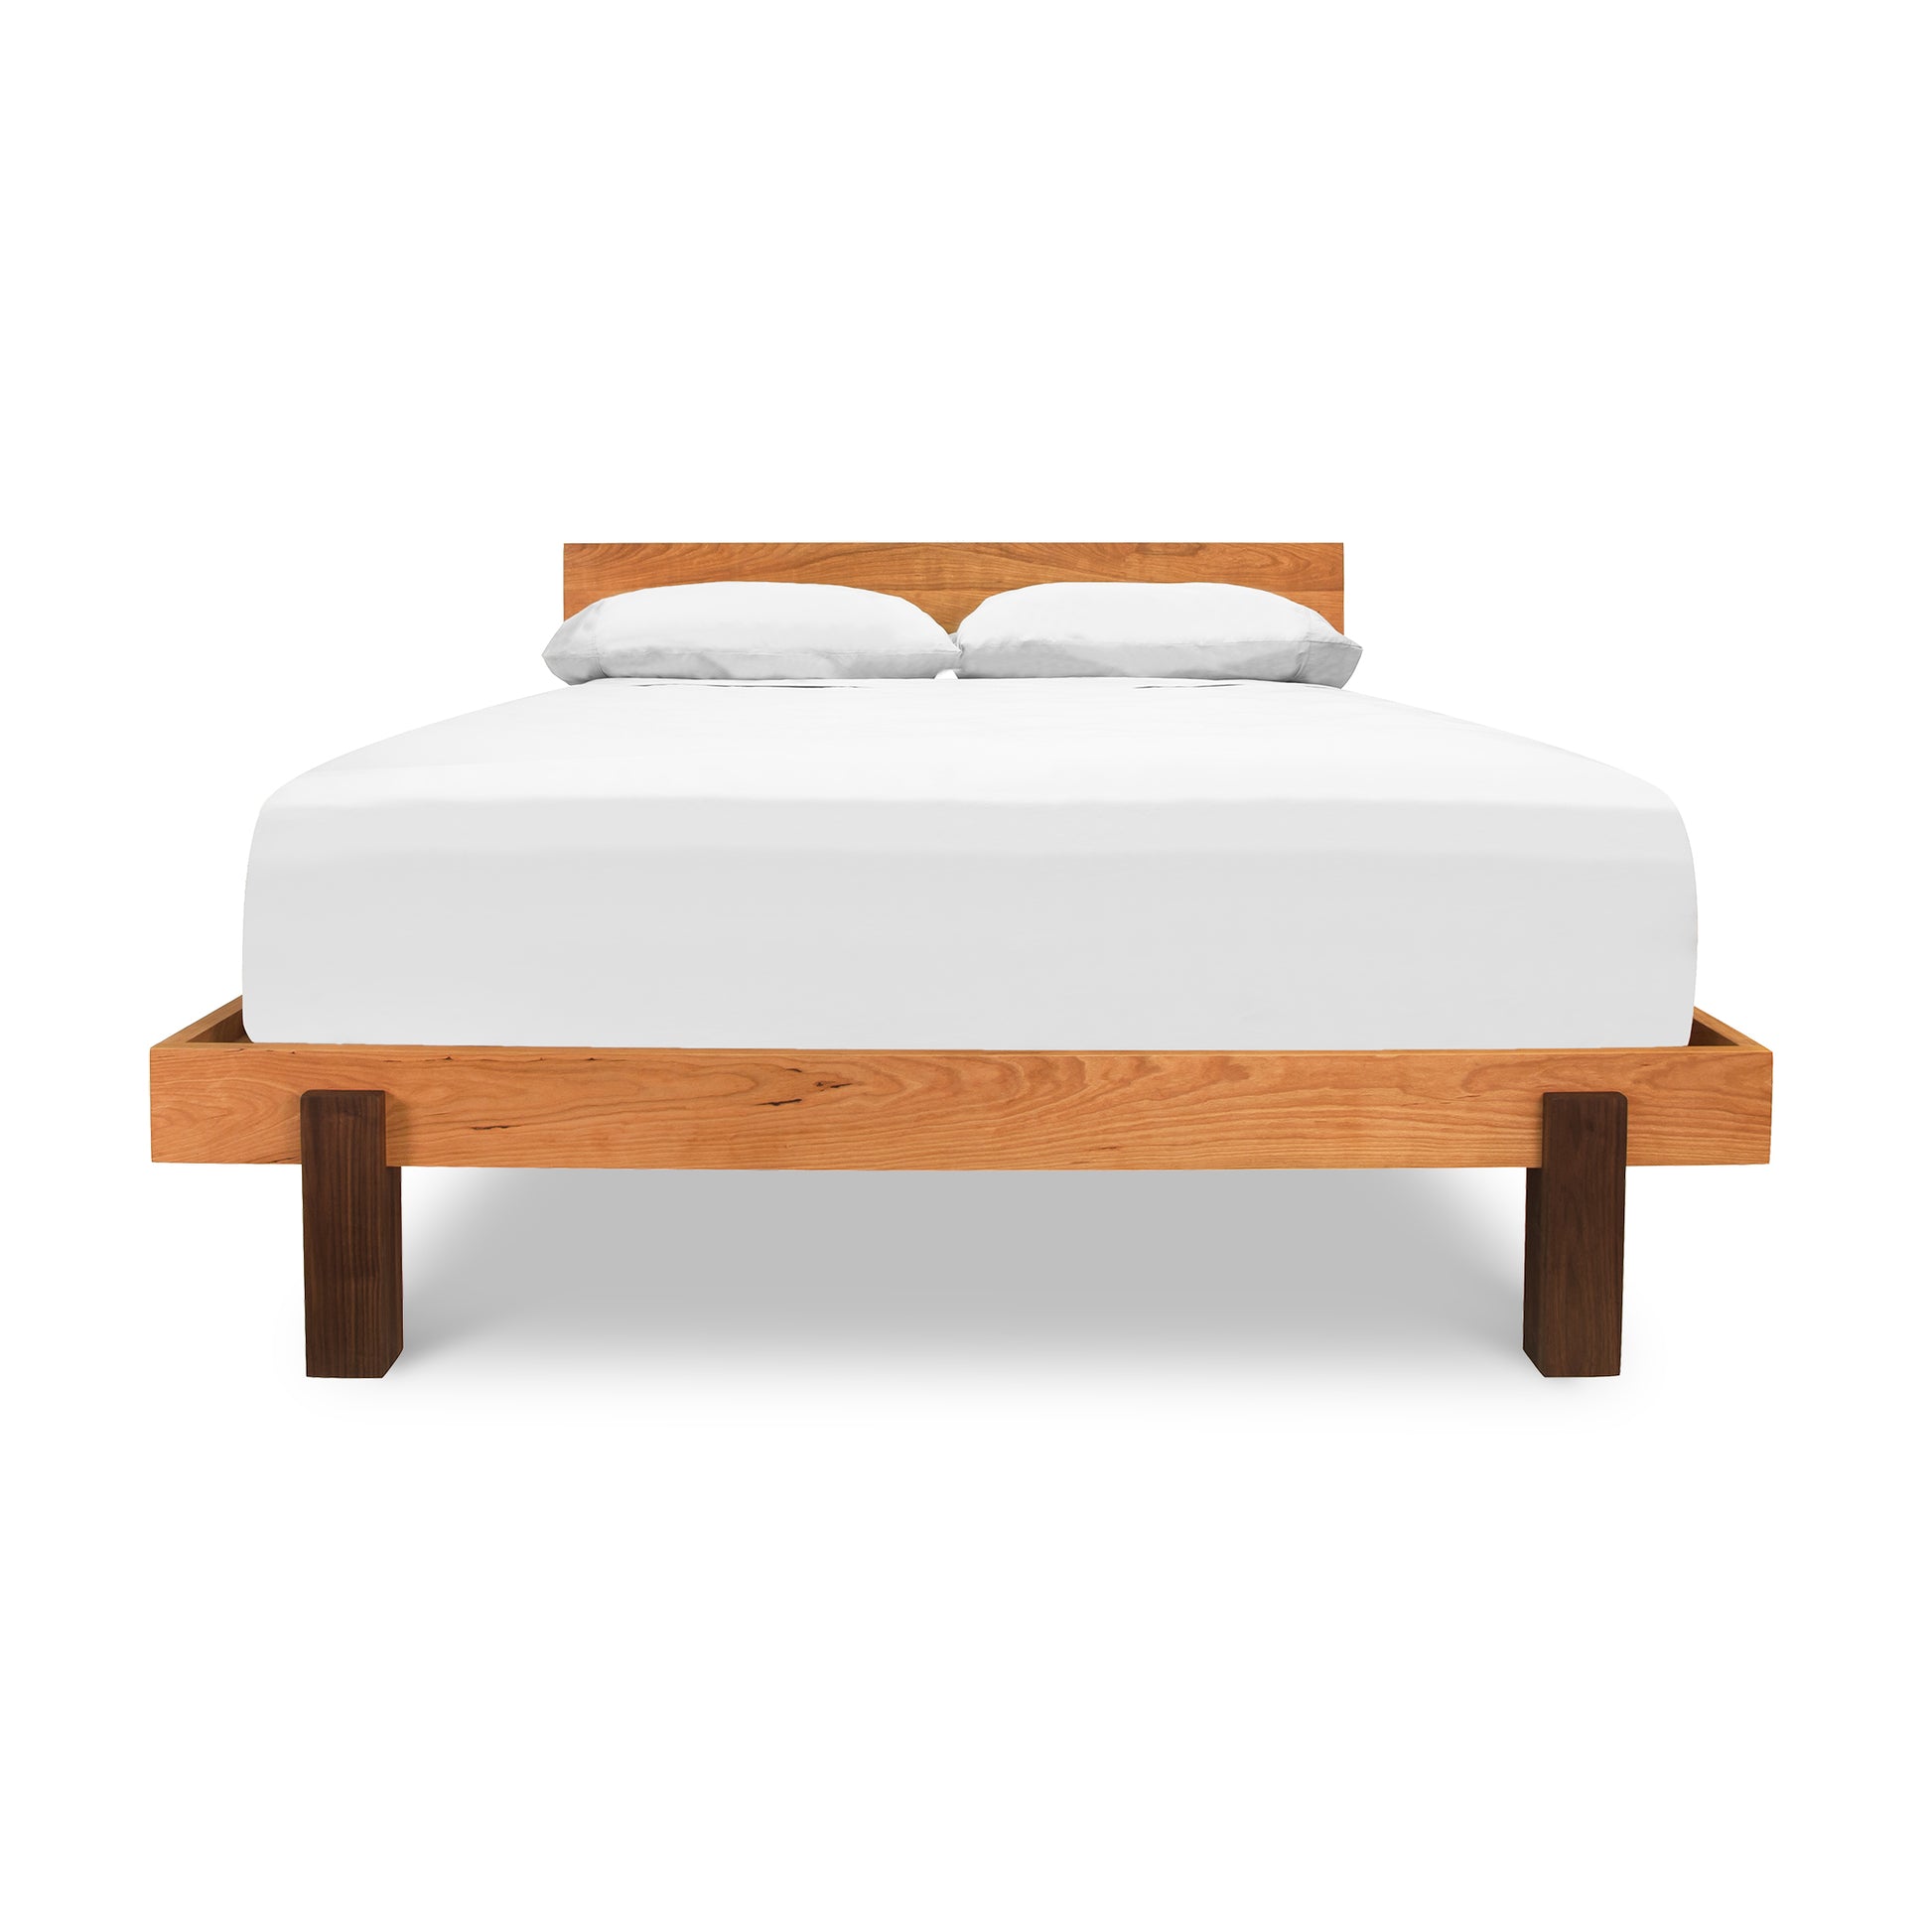 A simplistic Vermont Furniture Designs Modern American Platform Bed made of solid hardwoods, with a white mattress and two pillows, isolated on a white background.